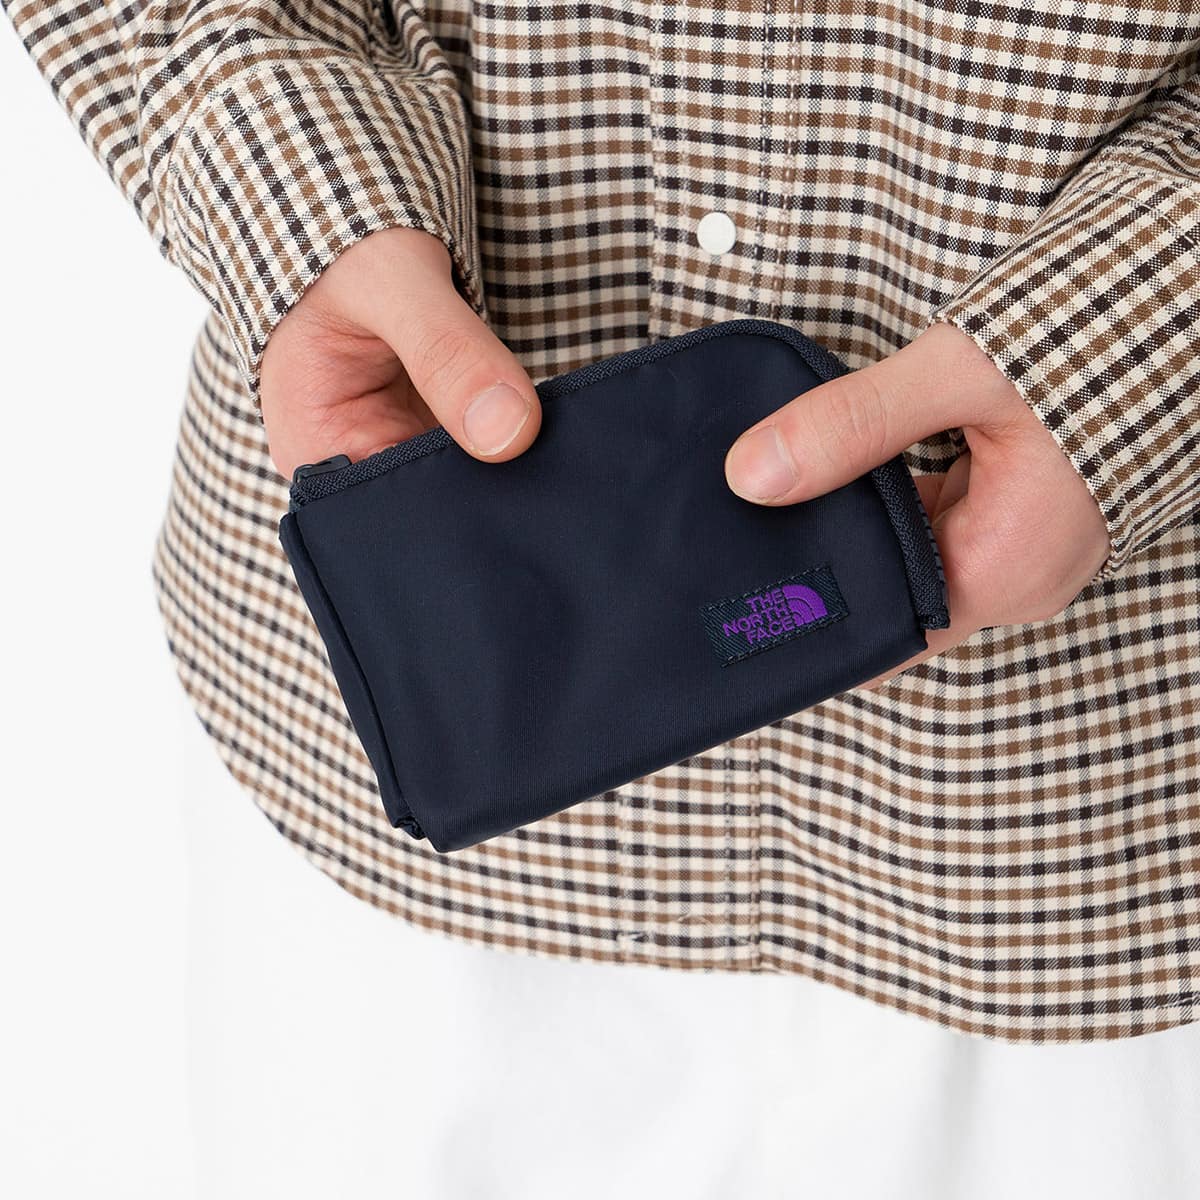 THE NORTH FACE PURPLE LABEL LIMONTA Nylon Wallet Navy 22FW-I